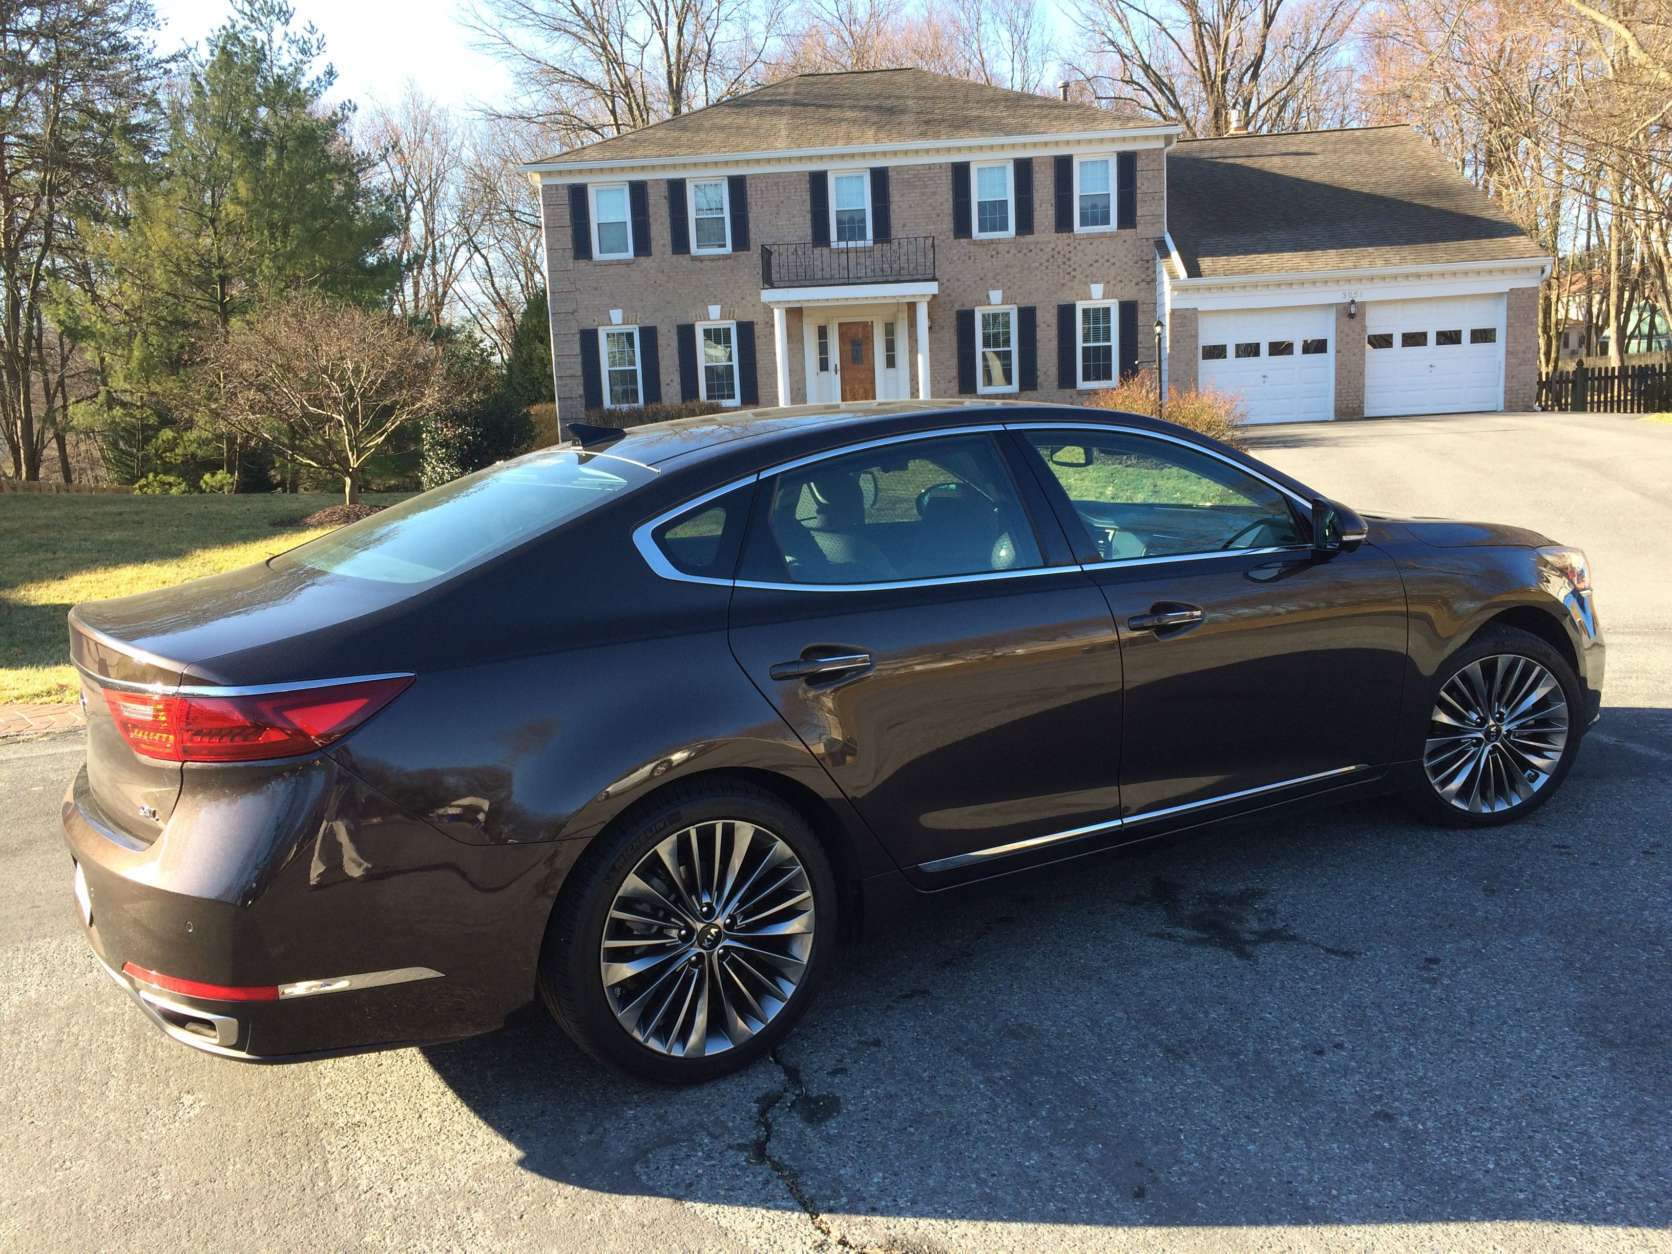 Large 19-inch dark satin wheels play nicely with the granite brown paint. (WTOP/Mike Parris)